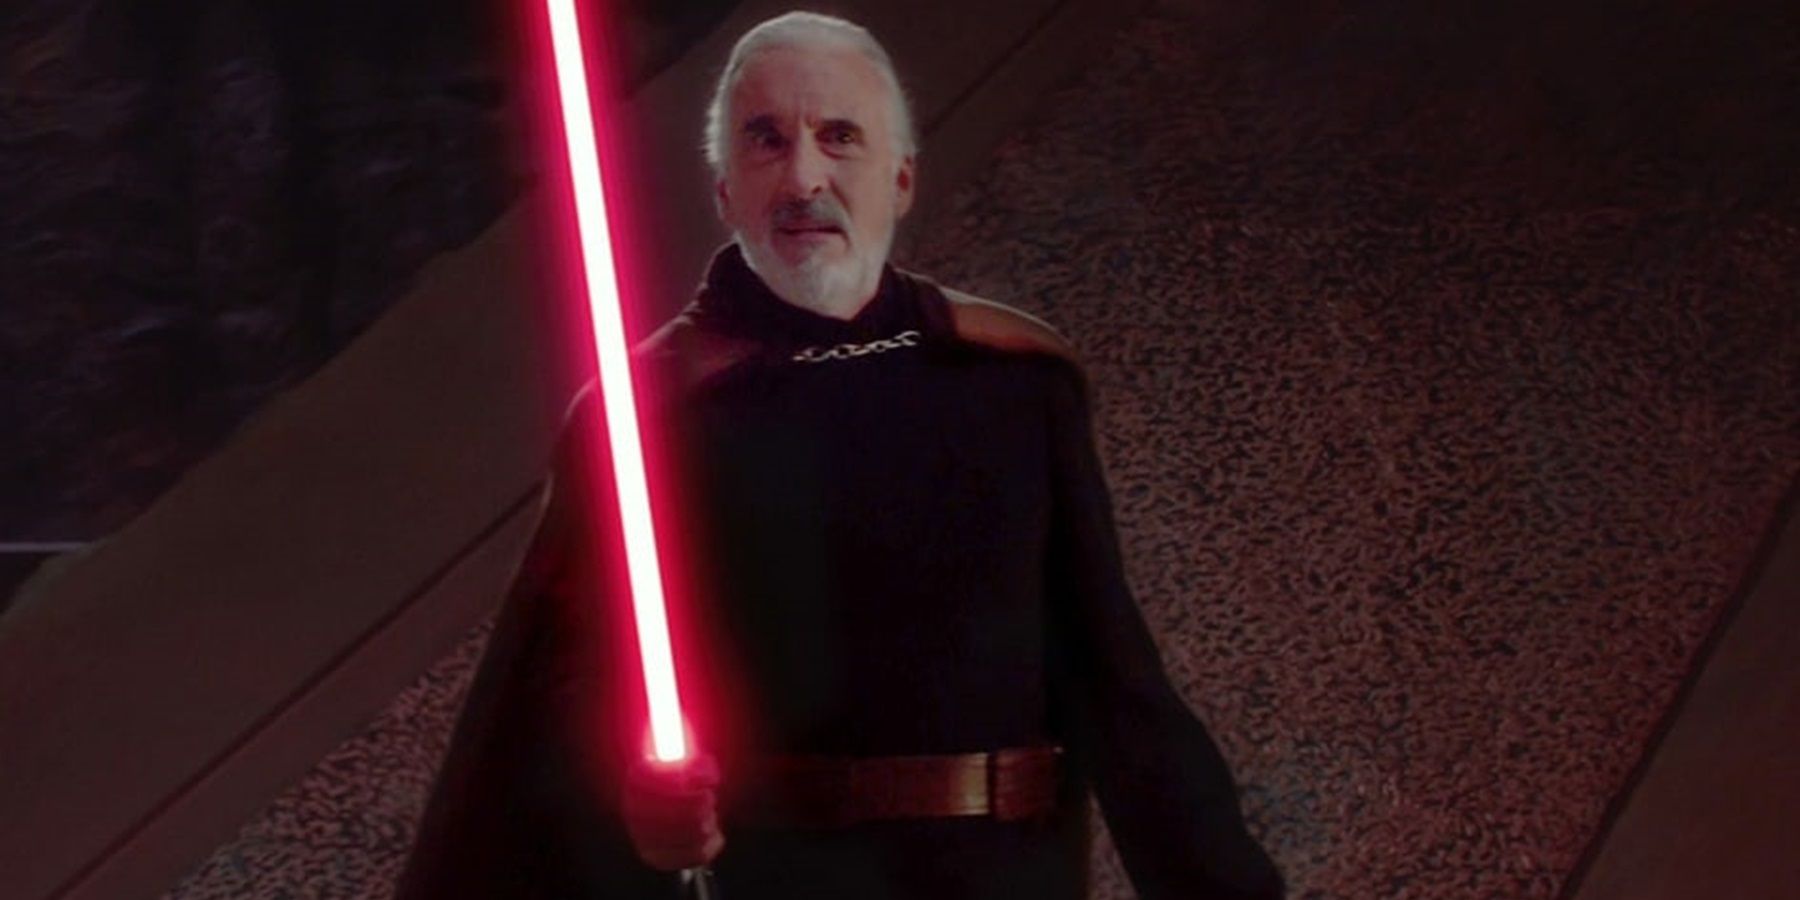 Count Dooku with his lightsaber in Attack of the Clones